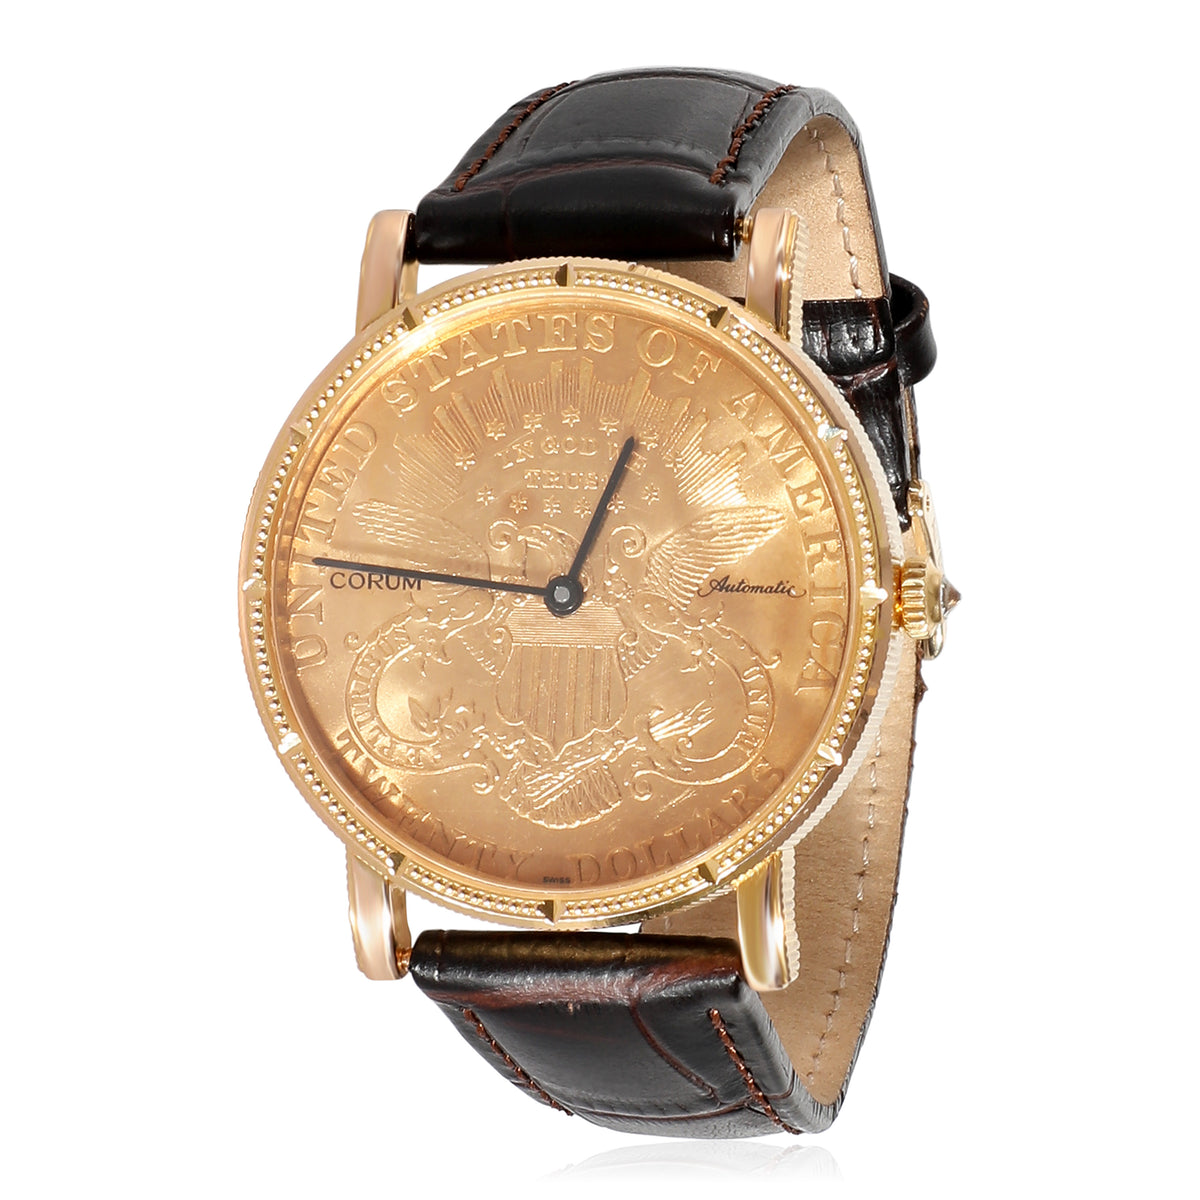 $20 Coin Coin Watch Men's Watch in 18k Yellow Gold